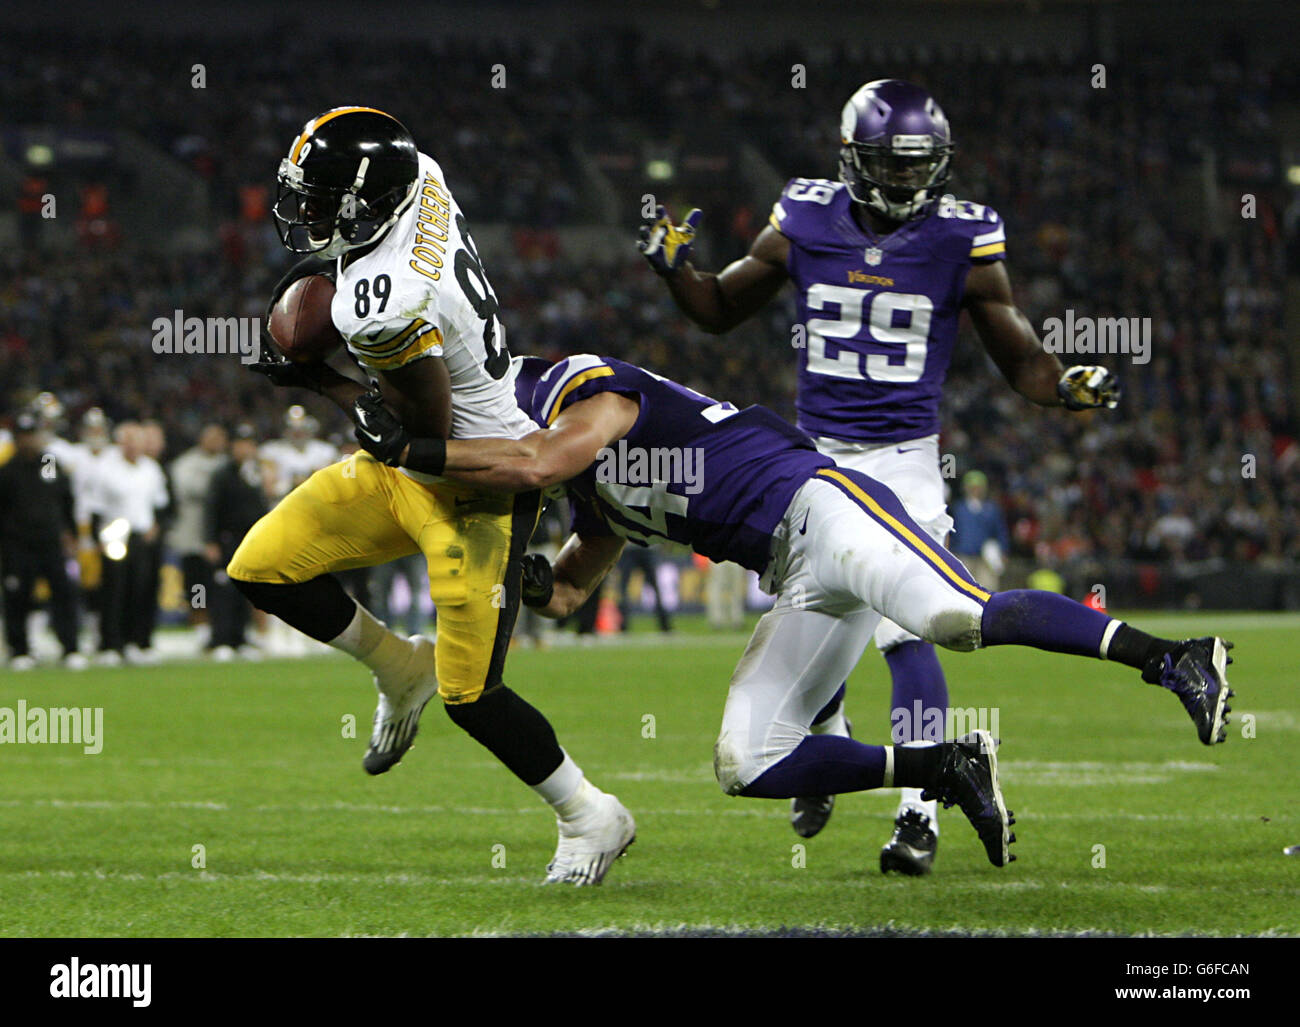 Nfl football scores hi-res stock photography and images - Alamy